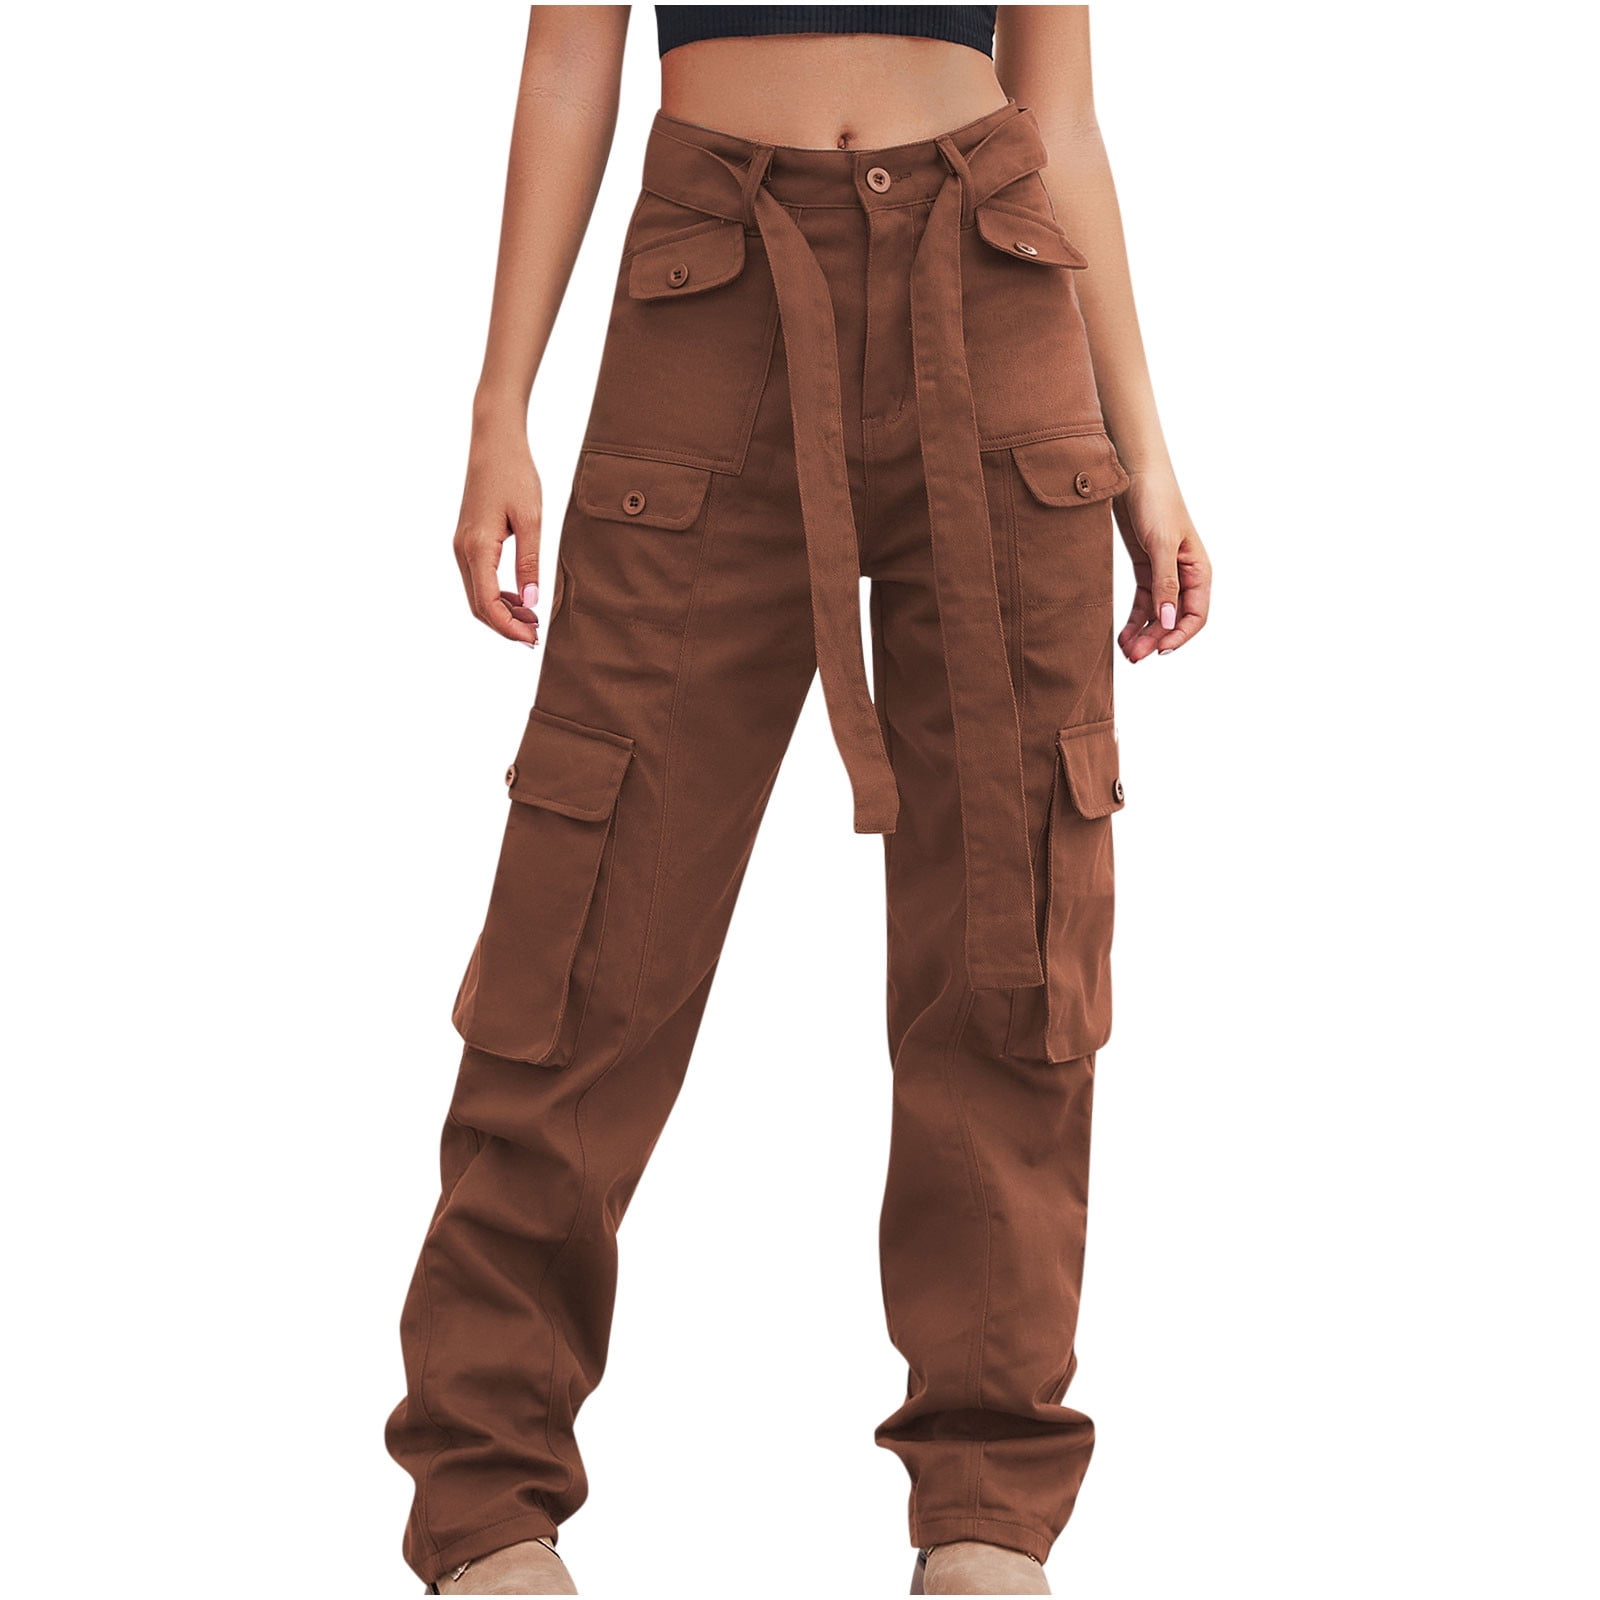 Women Plain High Waist Baggy Loose Long Pants Casual Trousers With Pocket